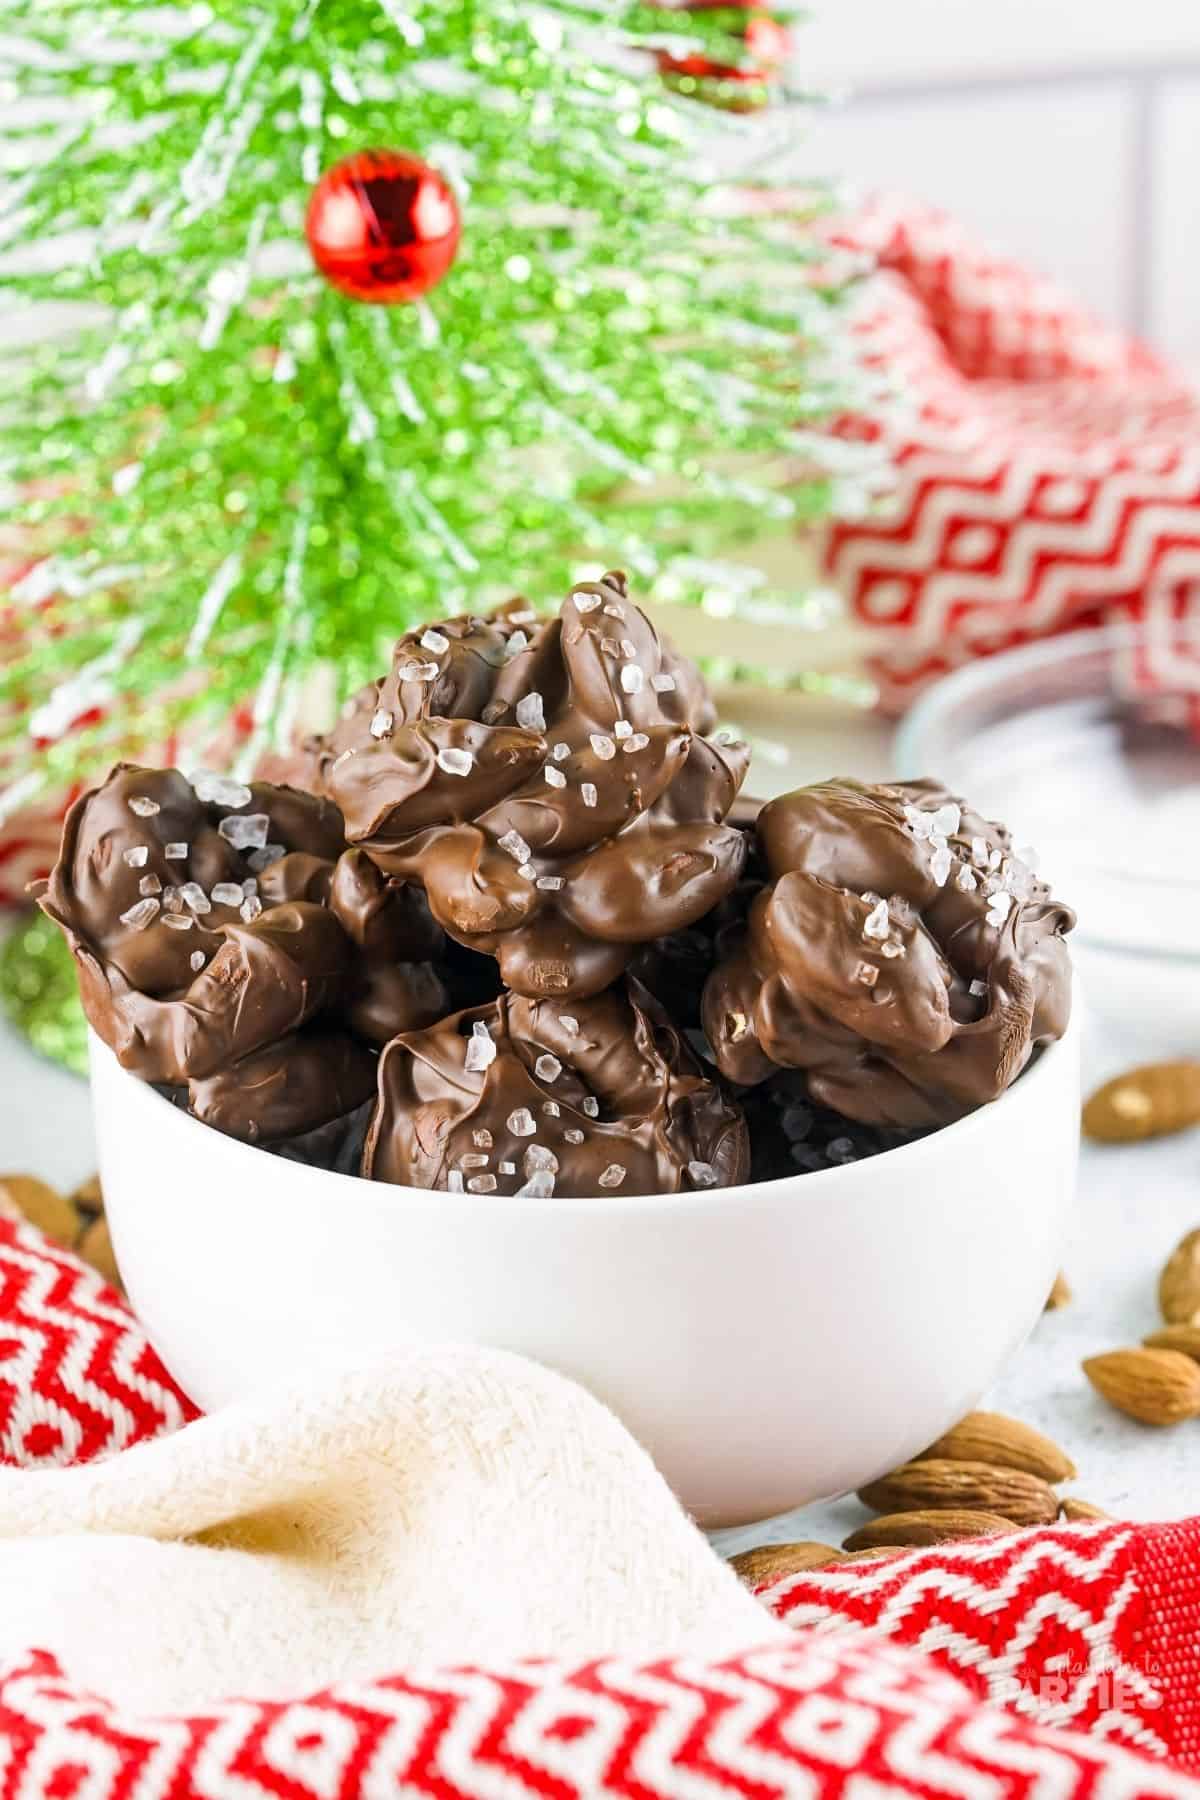 Salted chocolate nut clusters are perfect for special occasions like Christmas.